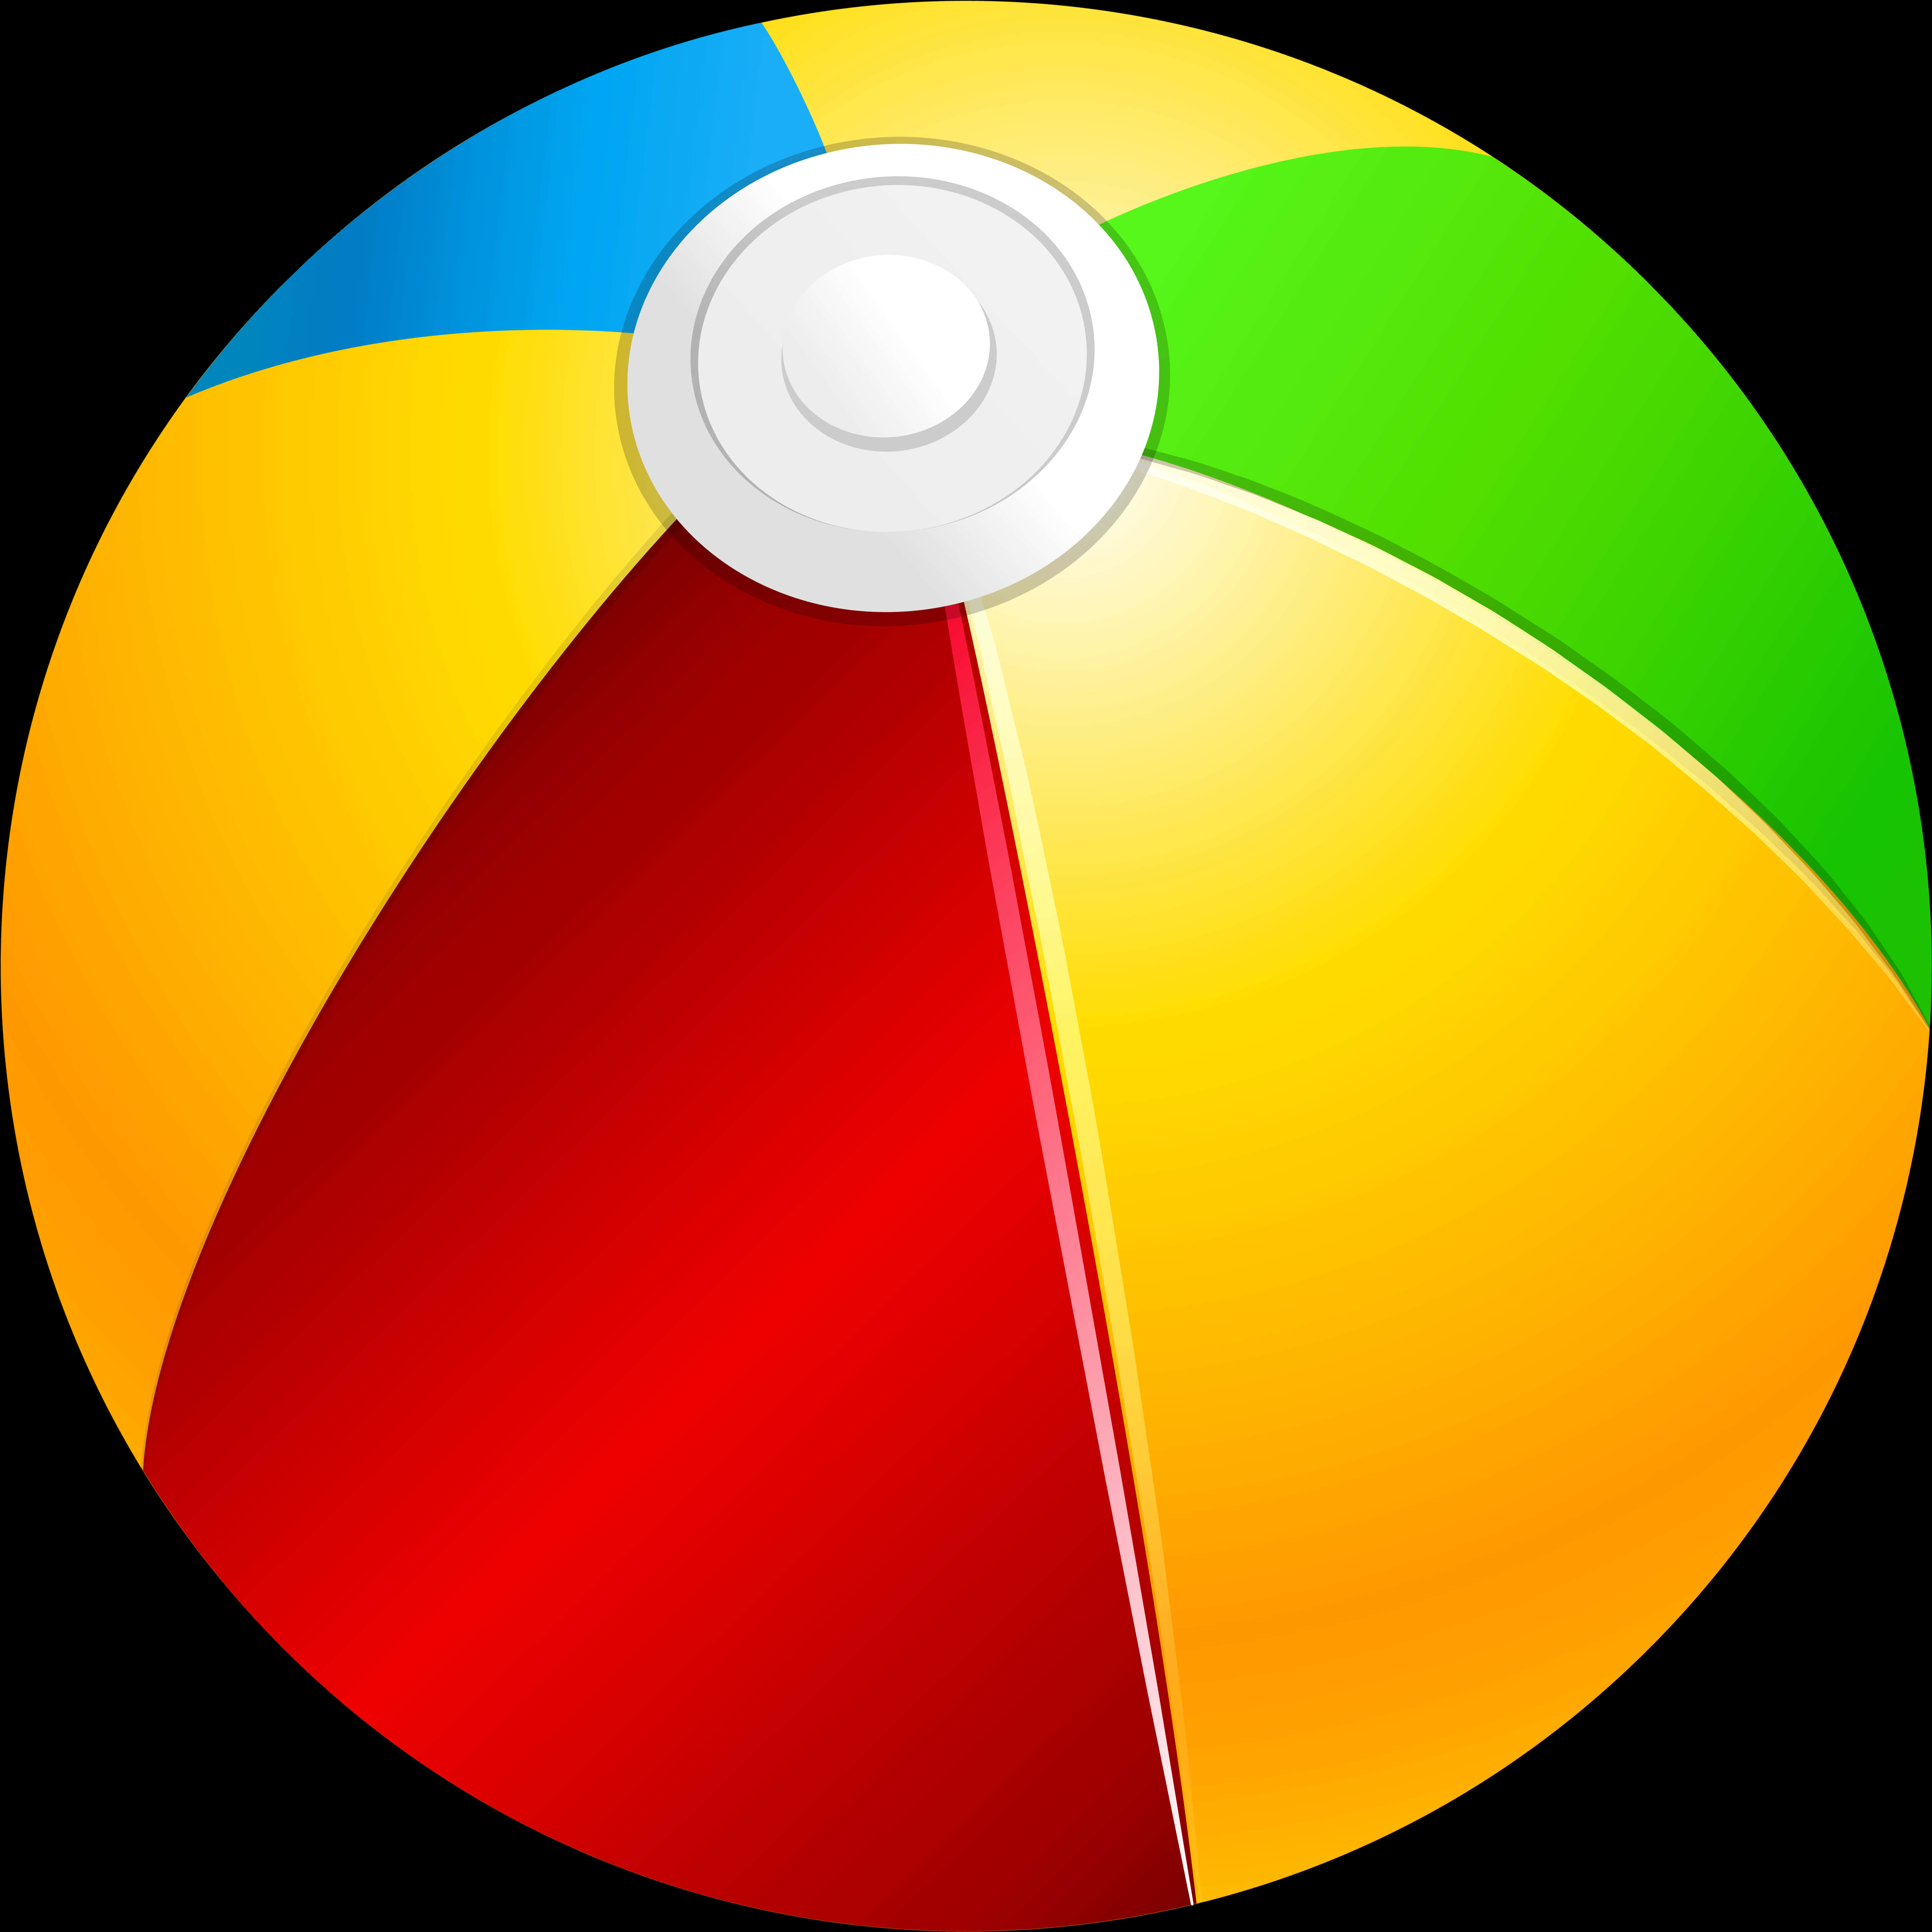 Colorful Beach Ball Graphic